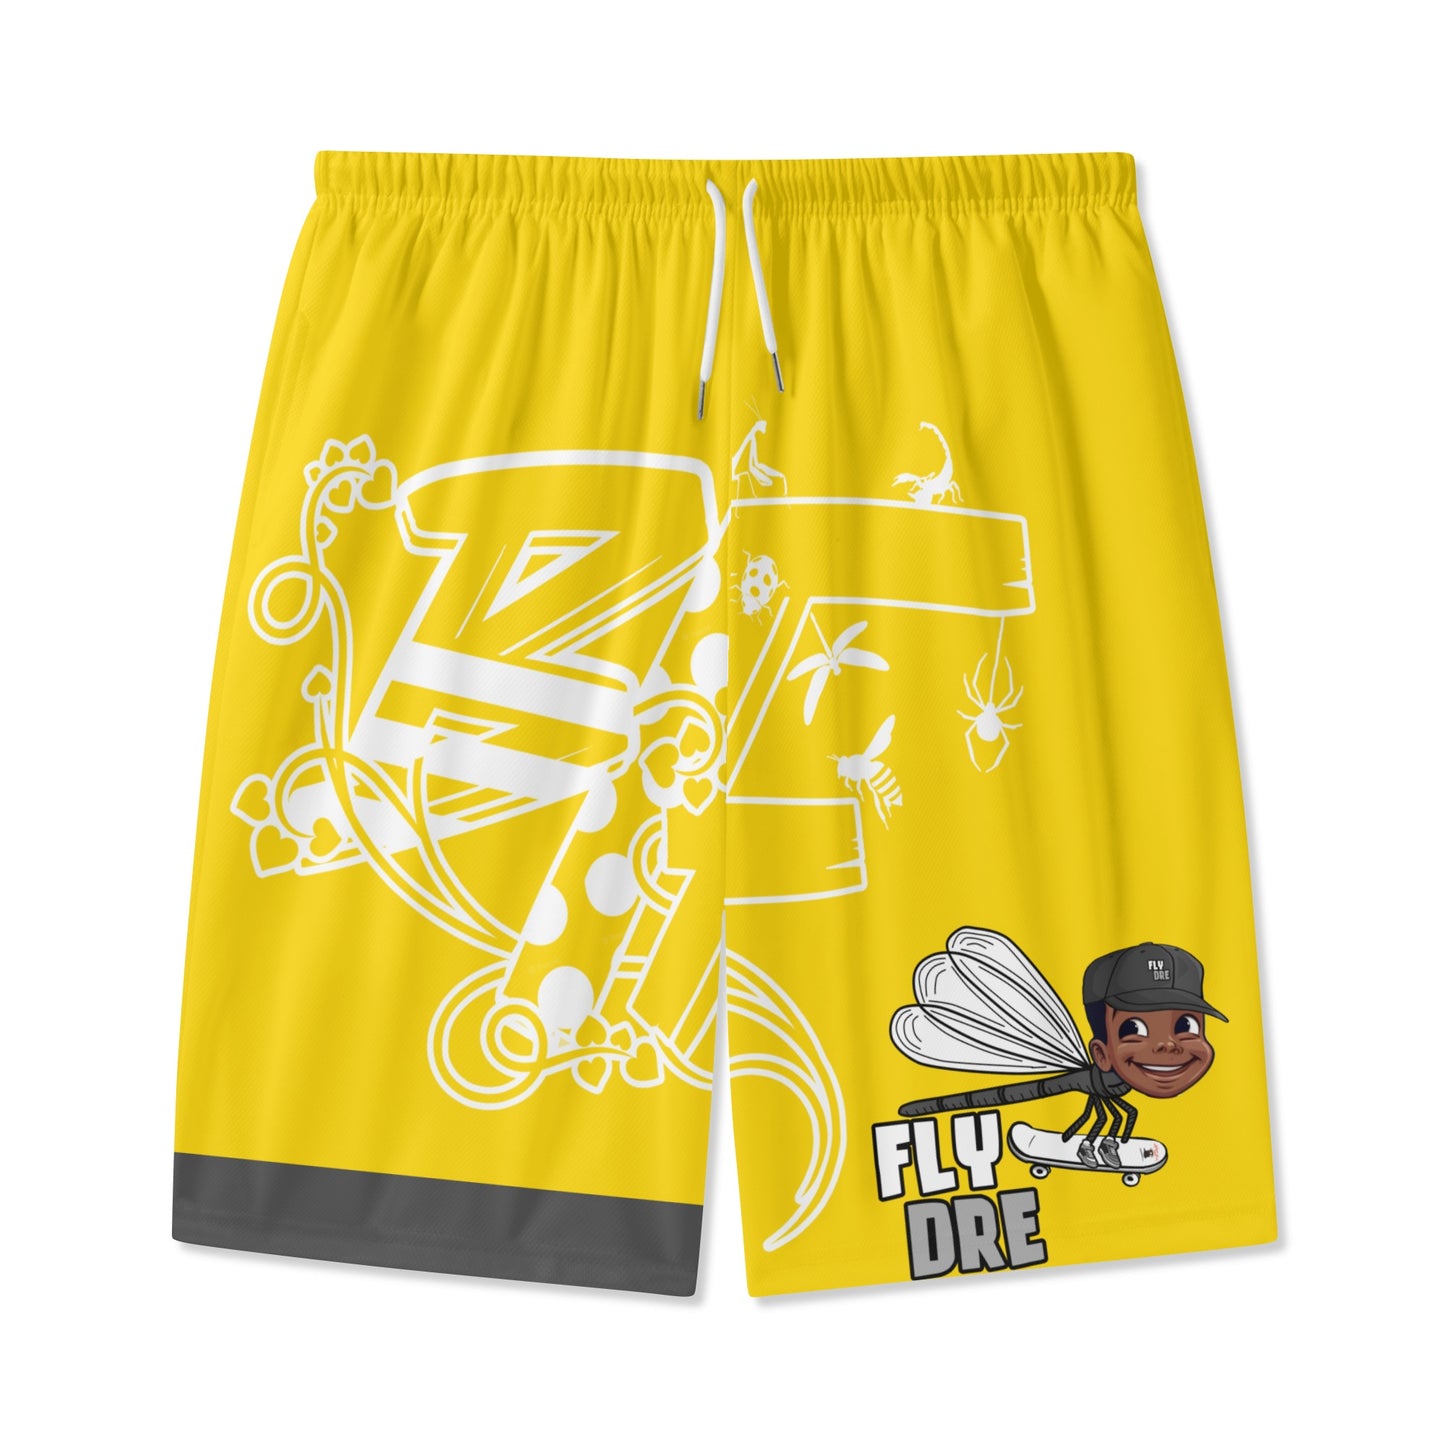 Fly Dre Youth Lightweight Beach Shorts